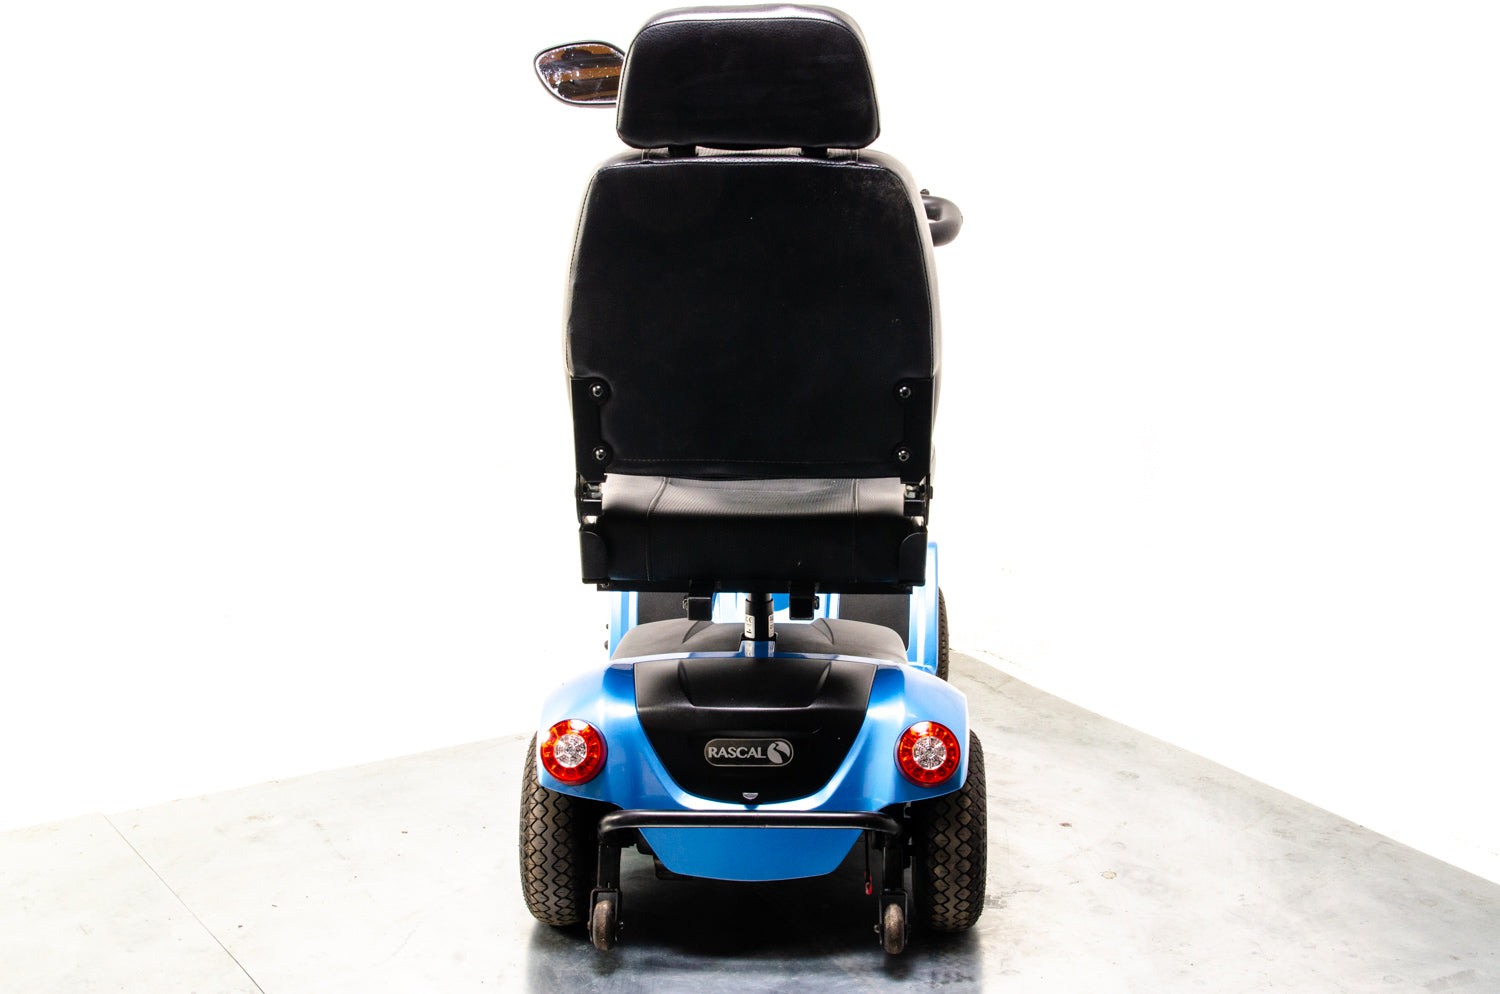 Rascal Vantage X Used Electric Mobility Scooter 6mph Compact Road Legal Baby Blue